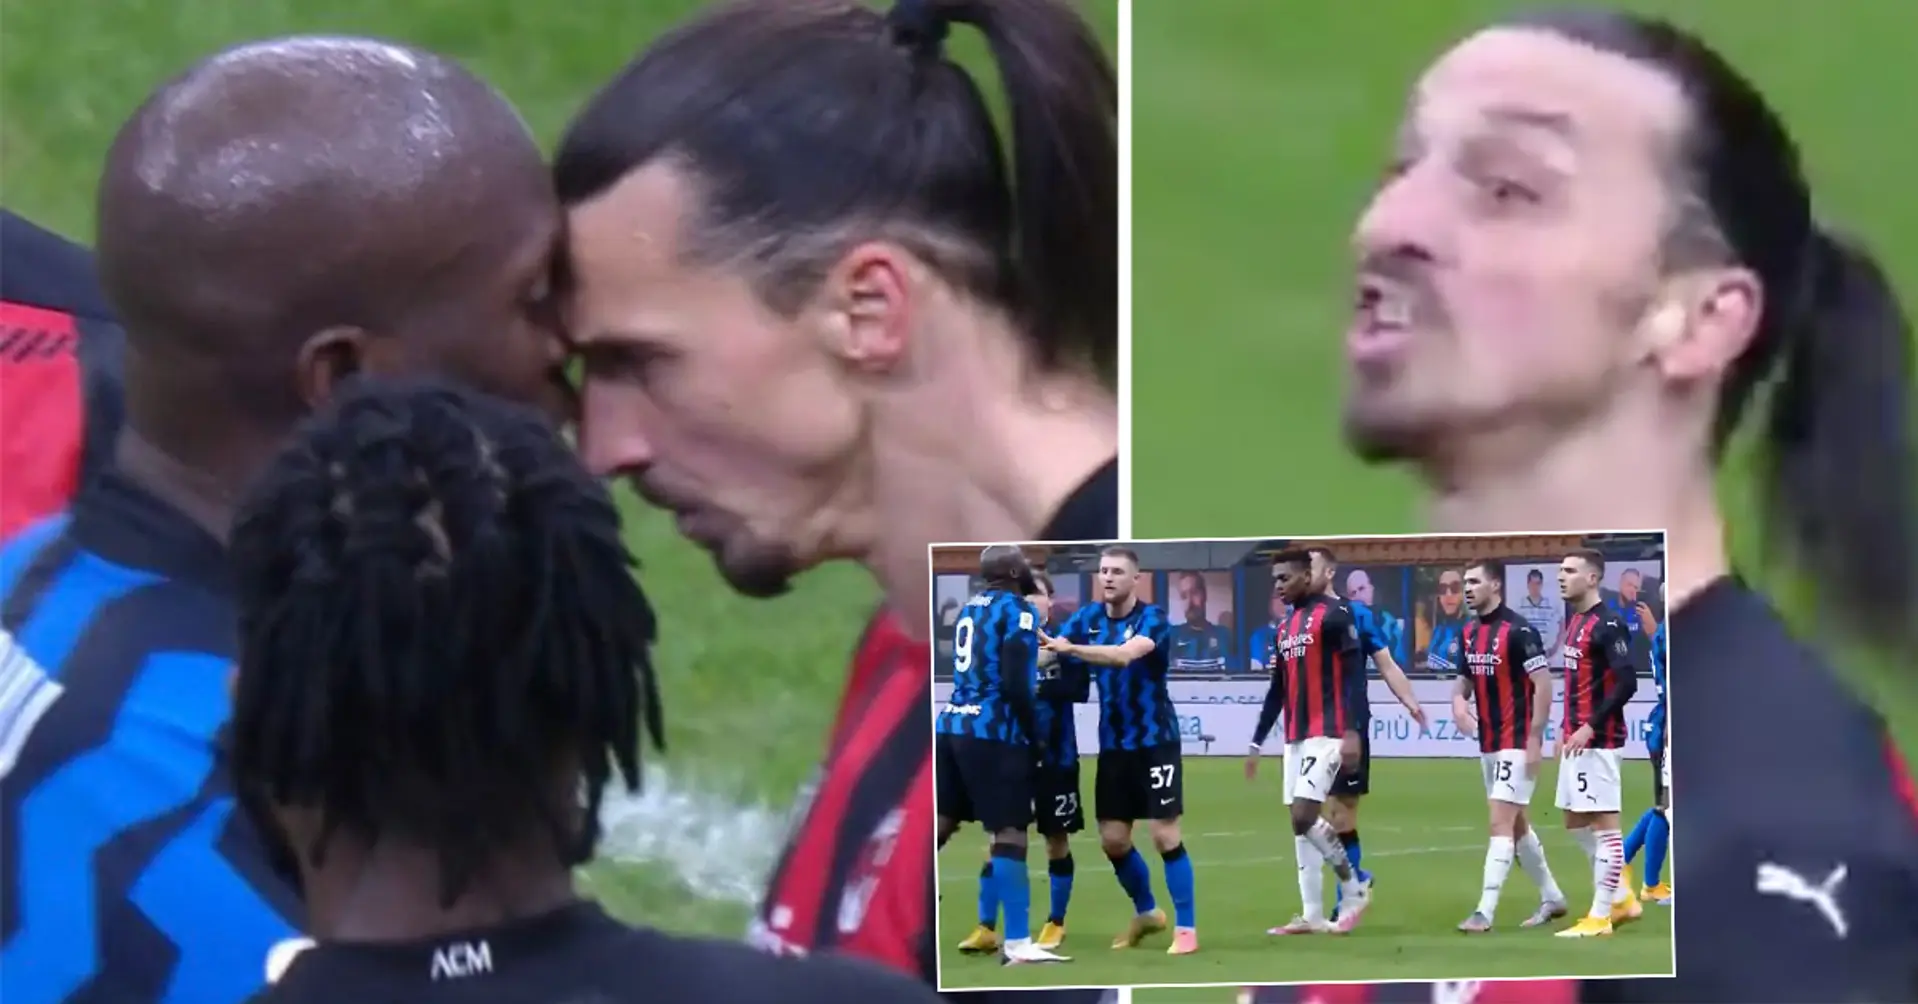 Lukaku to Ibrahimovic: 'You want to speak about my mother? I f*** you and your wife'